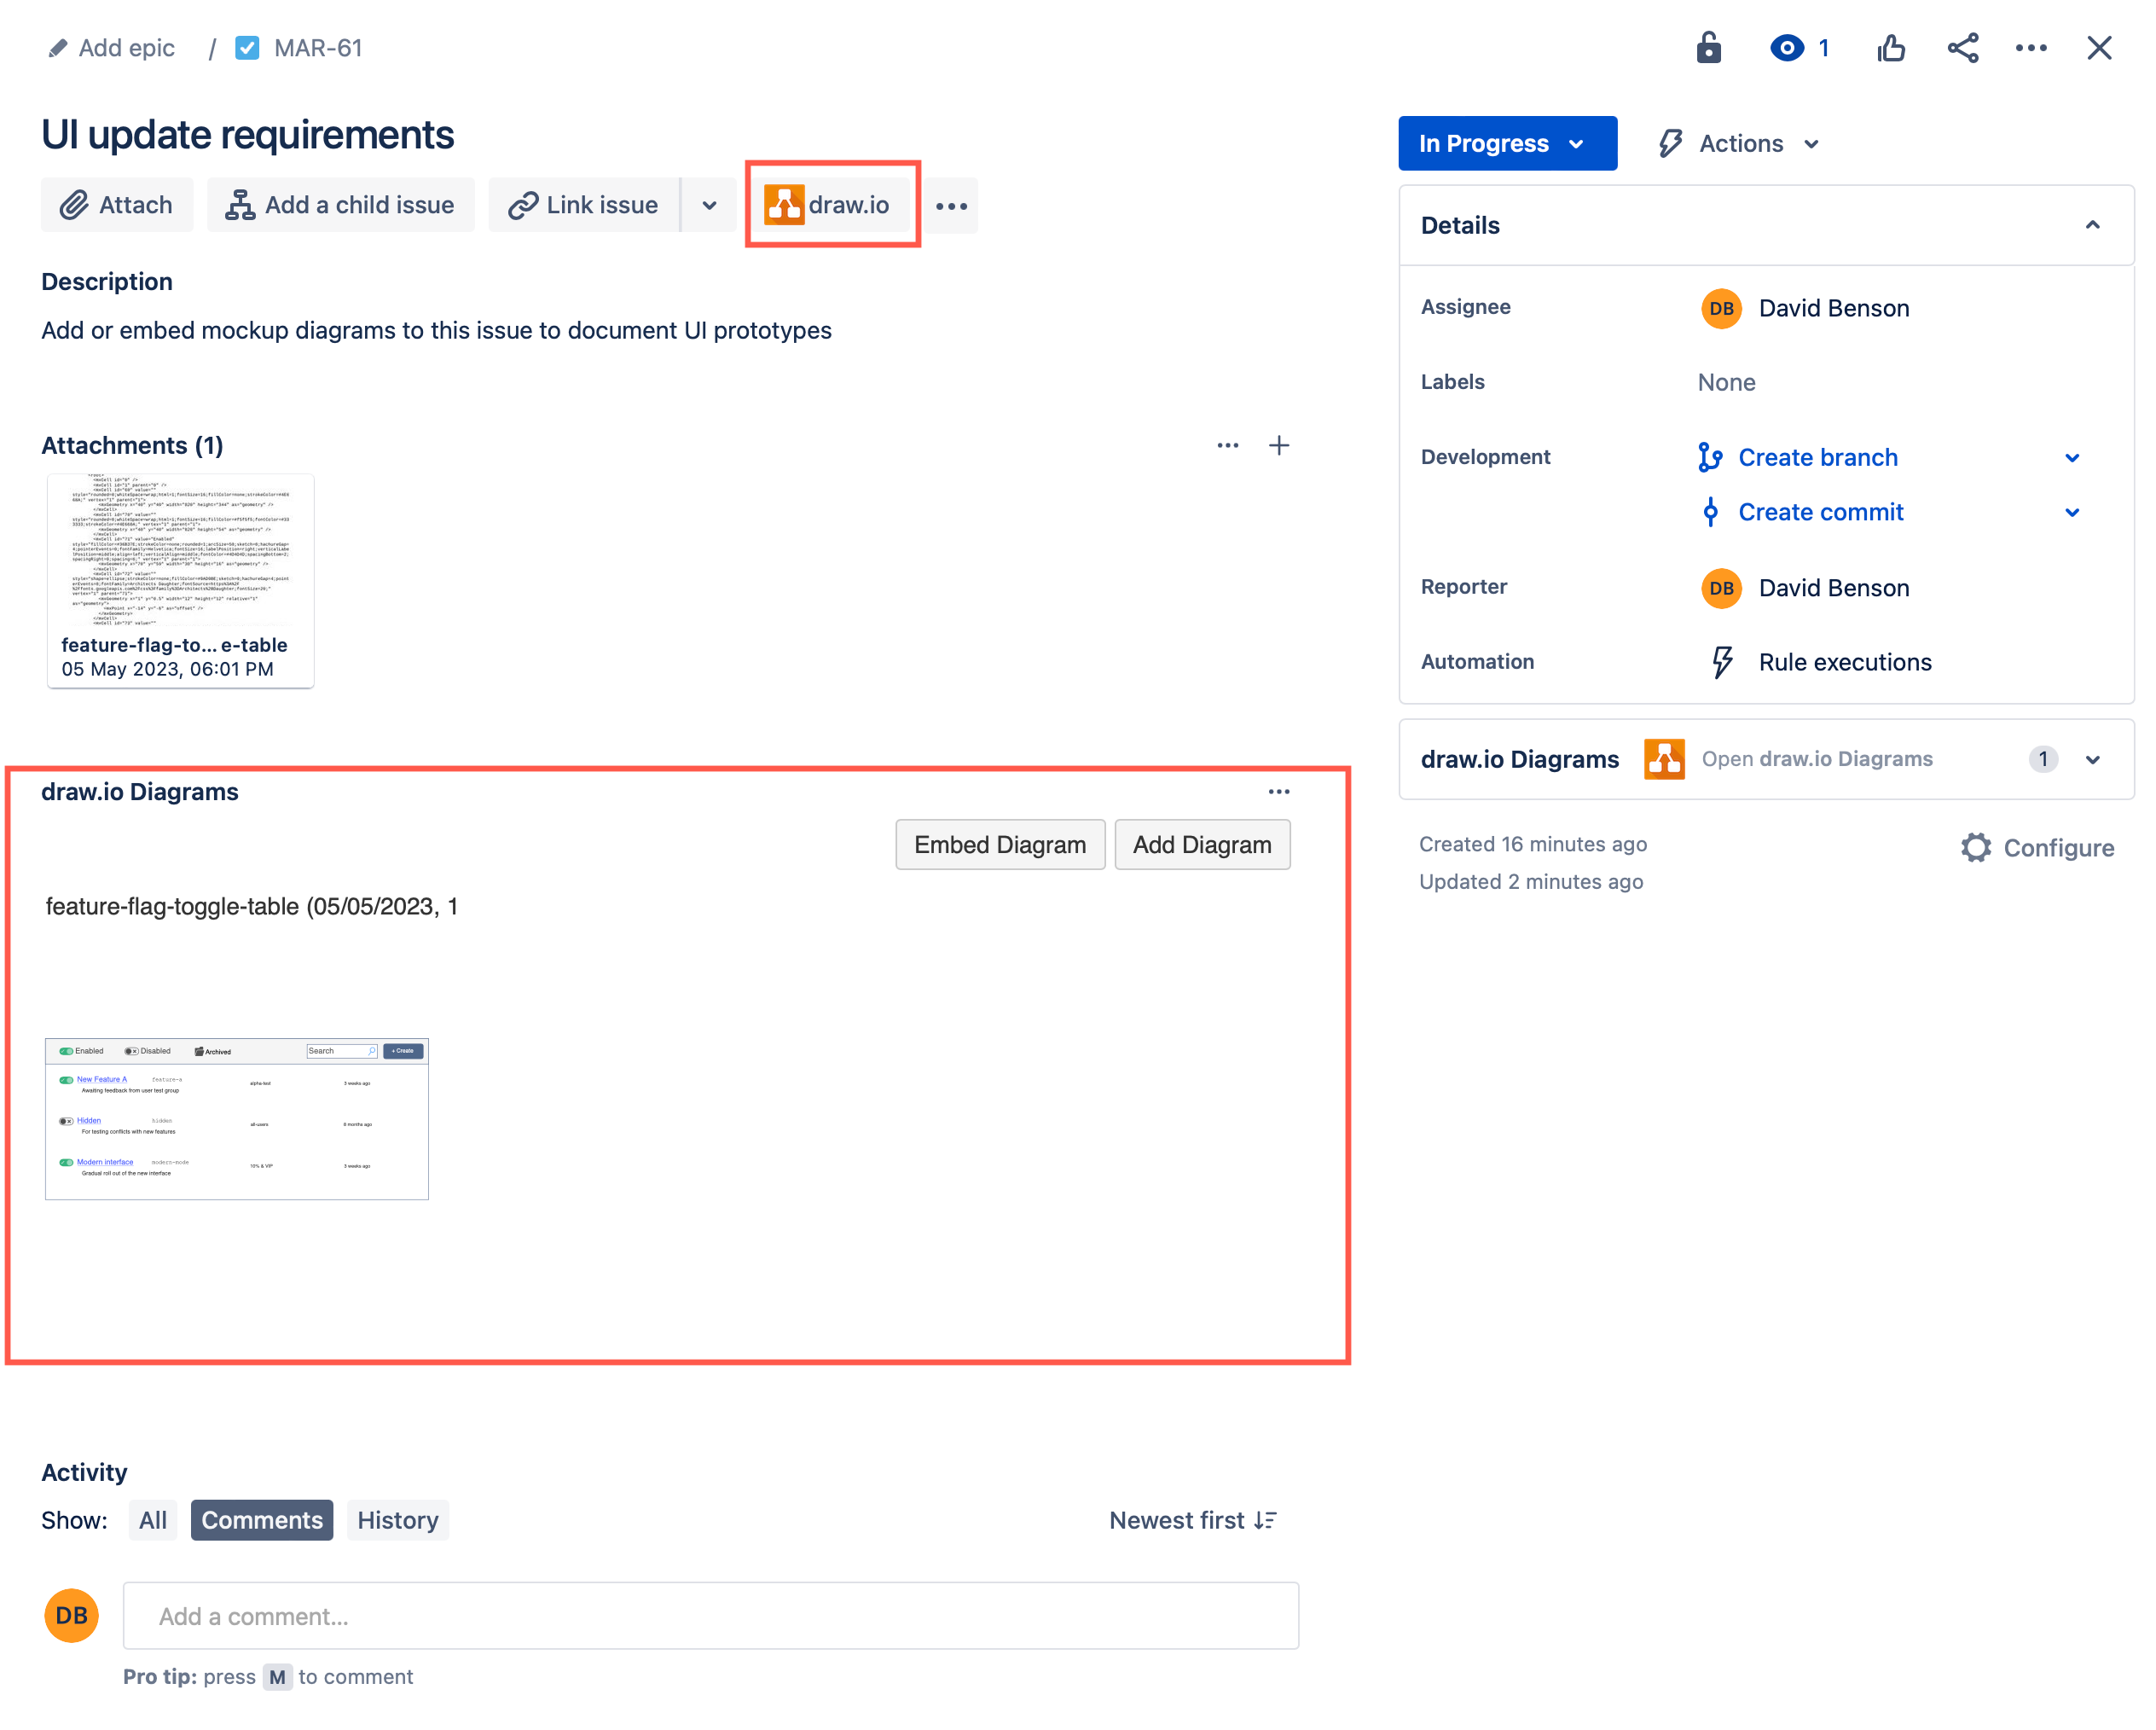 Display the draw.io diagrams section in your Jira Cloud issue